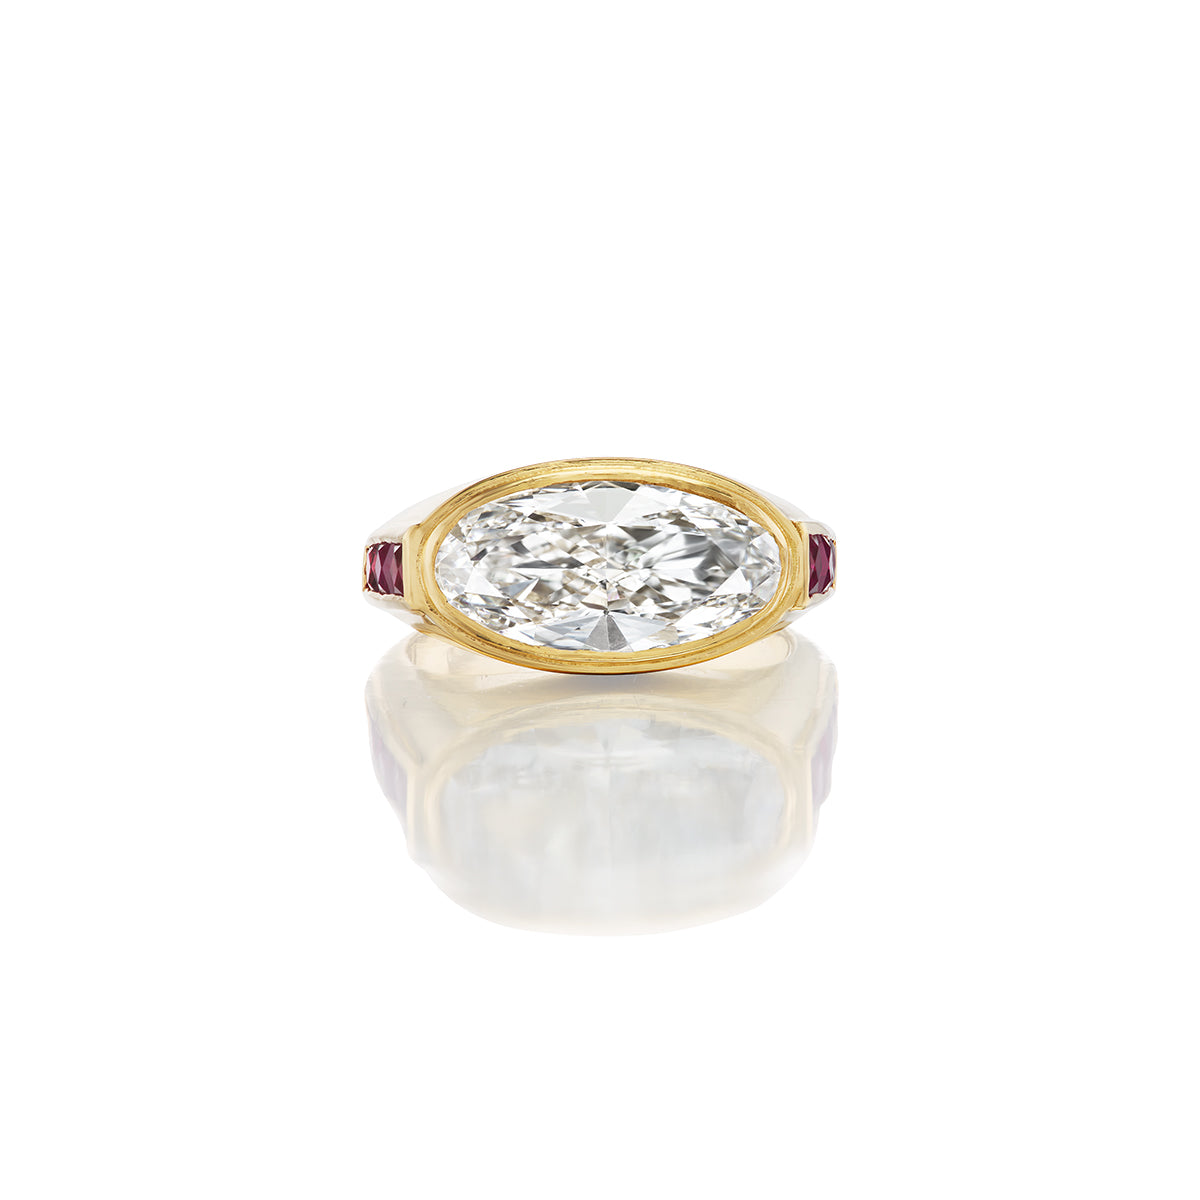 THE RUBY SLIPPER RING // 3.02 MOVAL